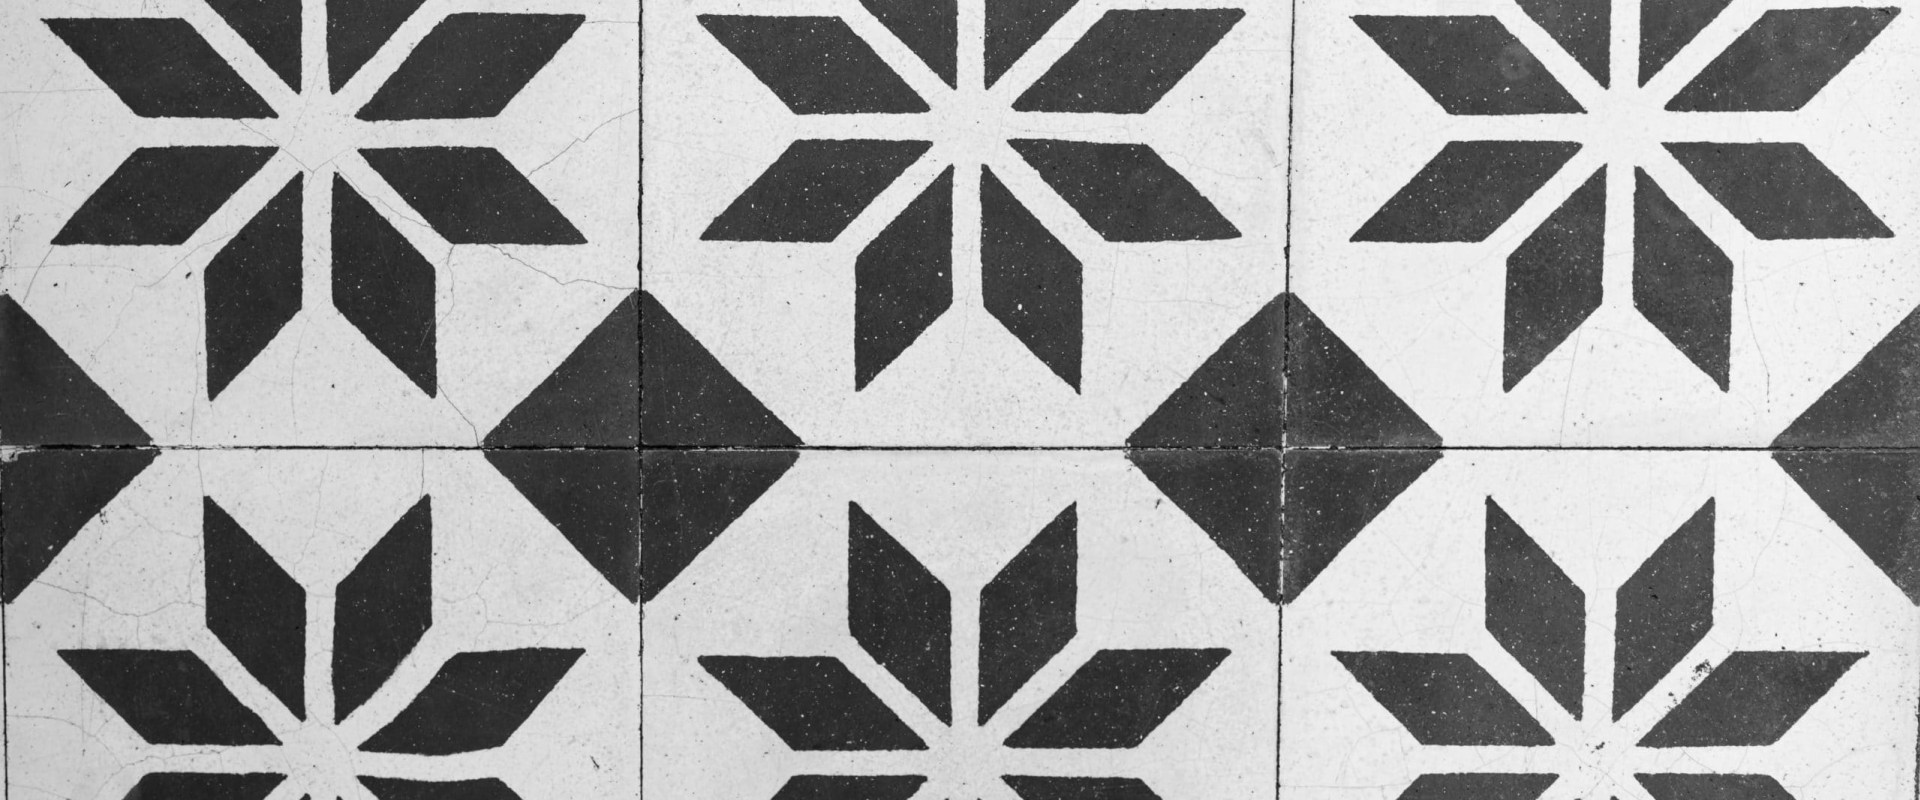 Tile: Exploring Different Types and Patterns